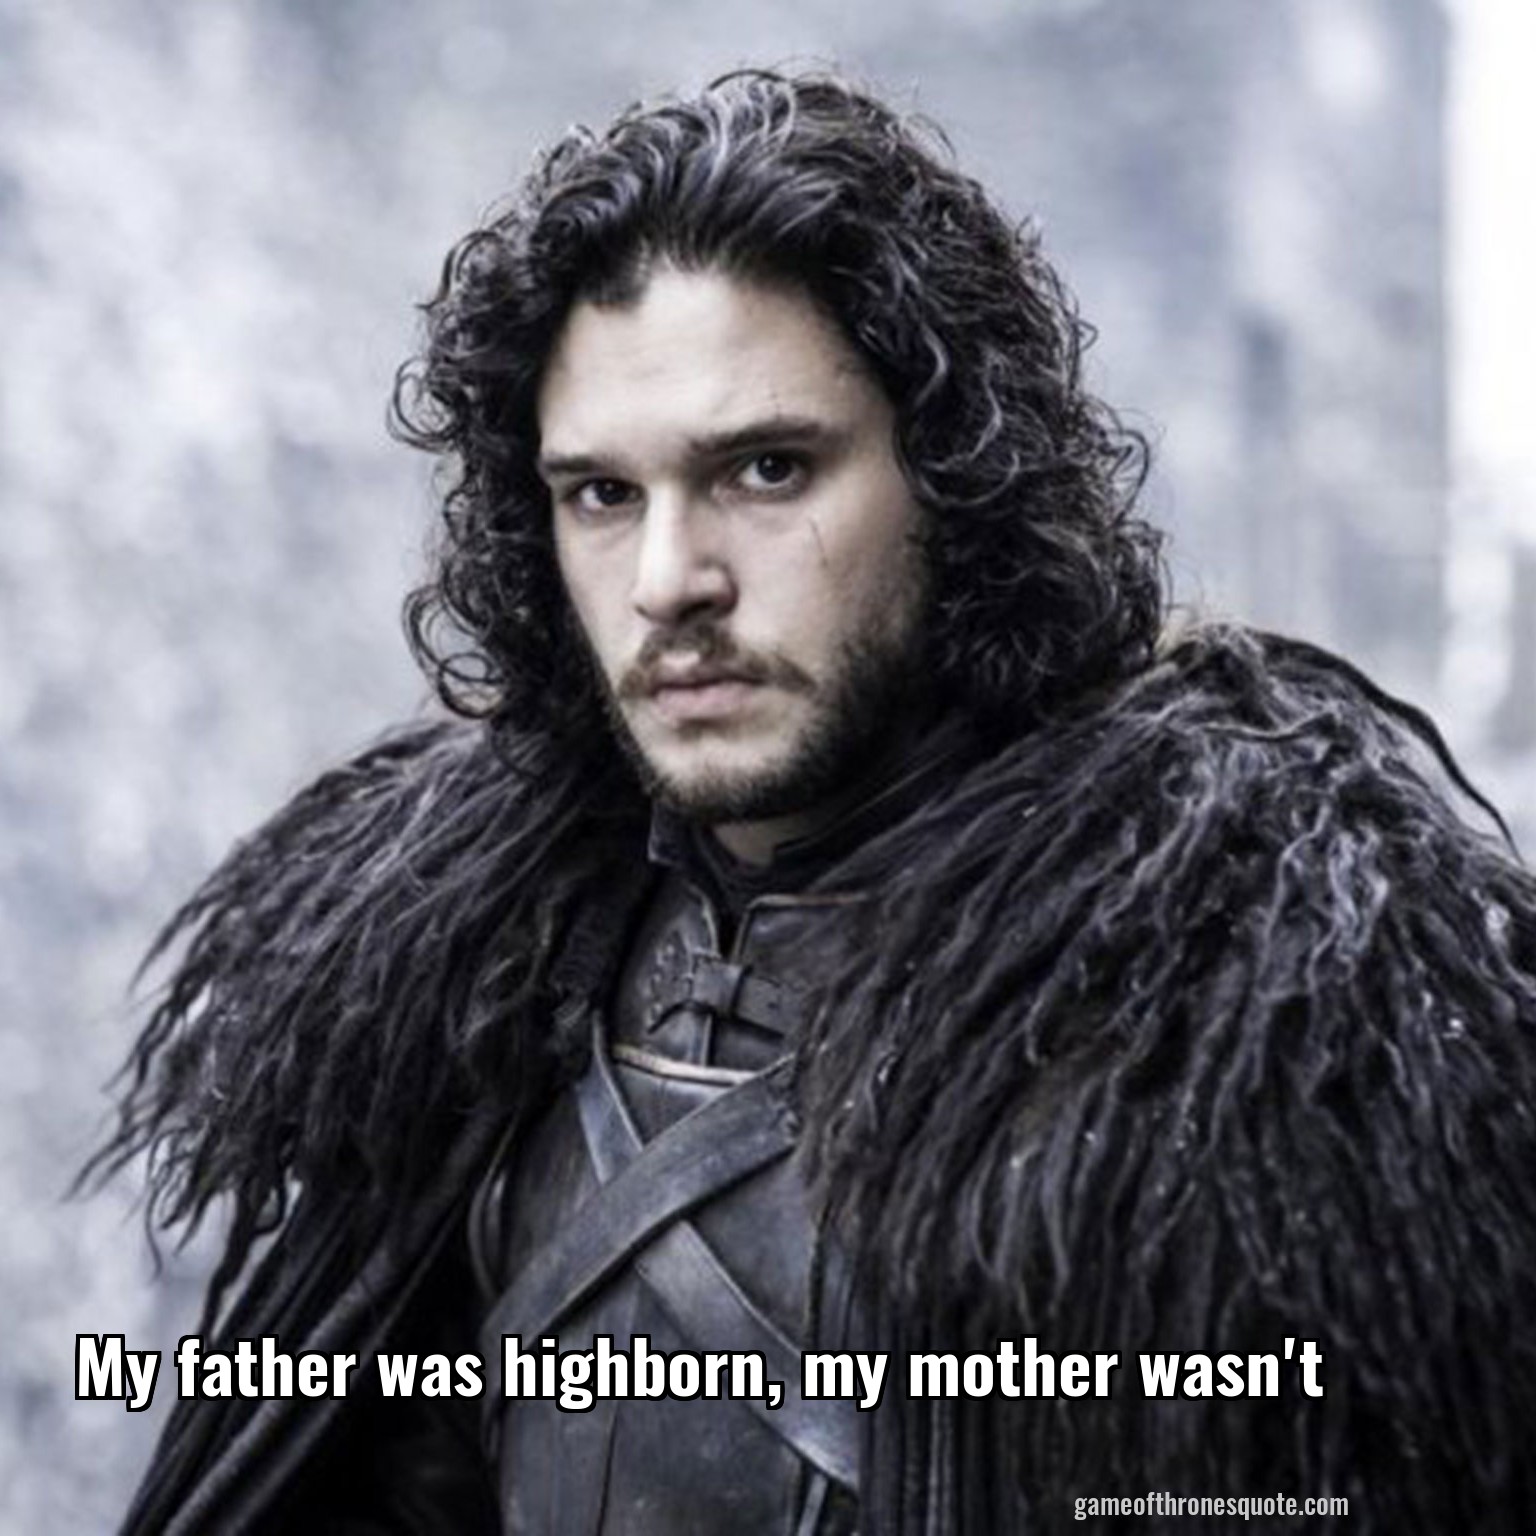 My father was highborn, my mother wasn't